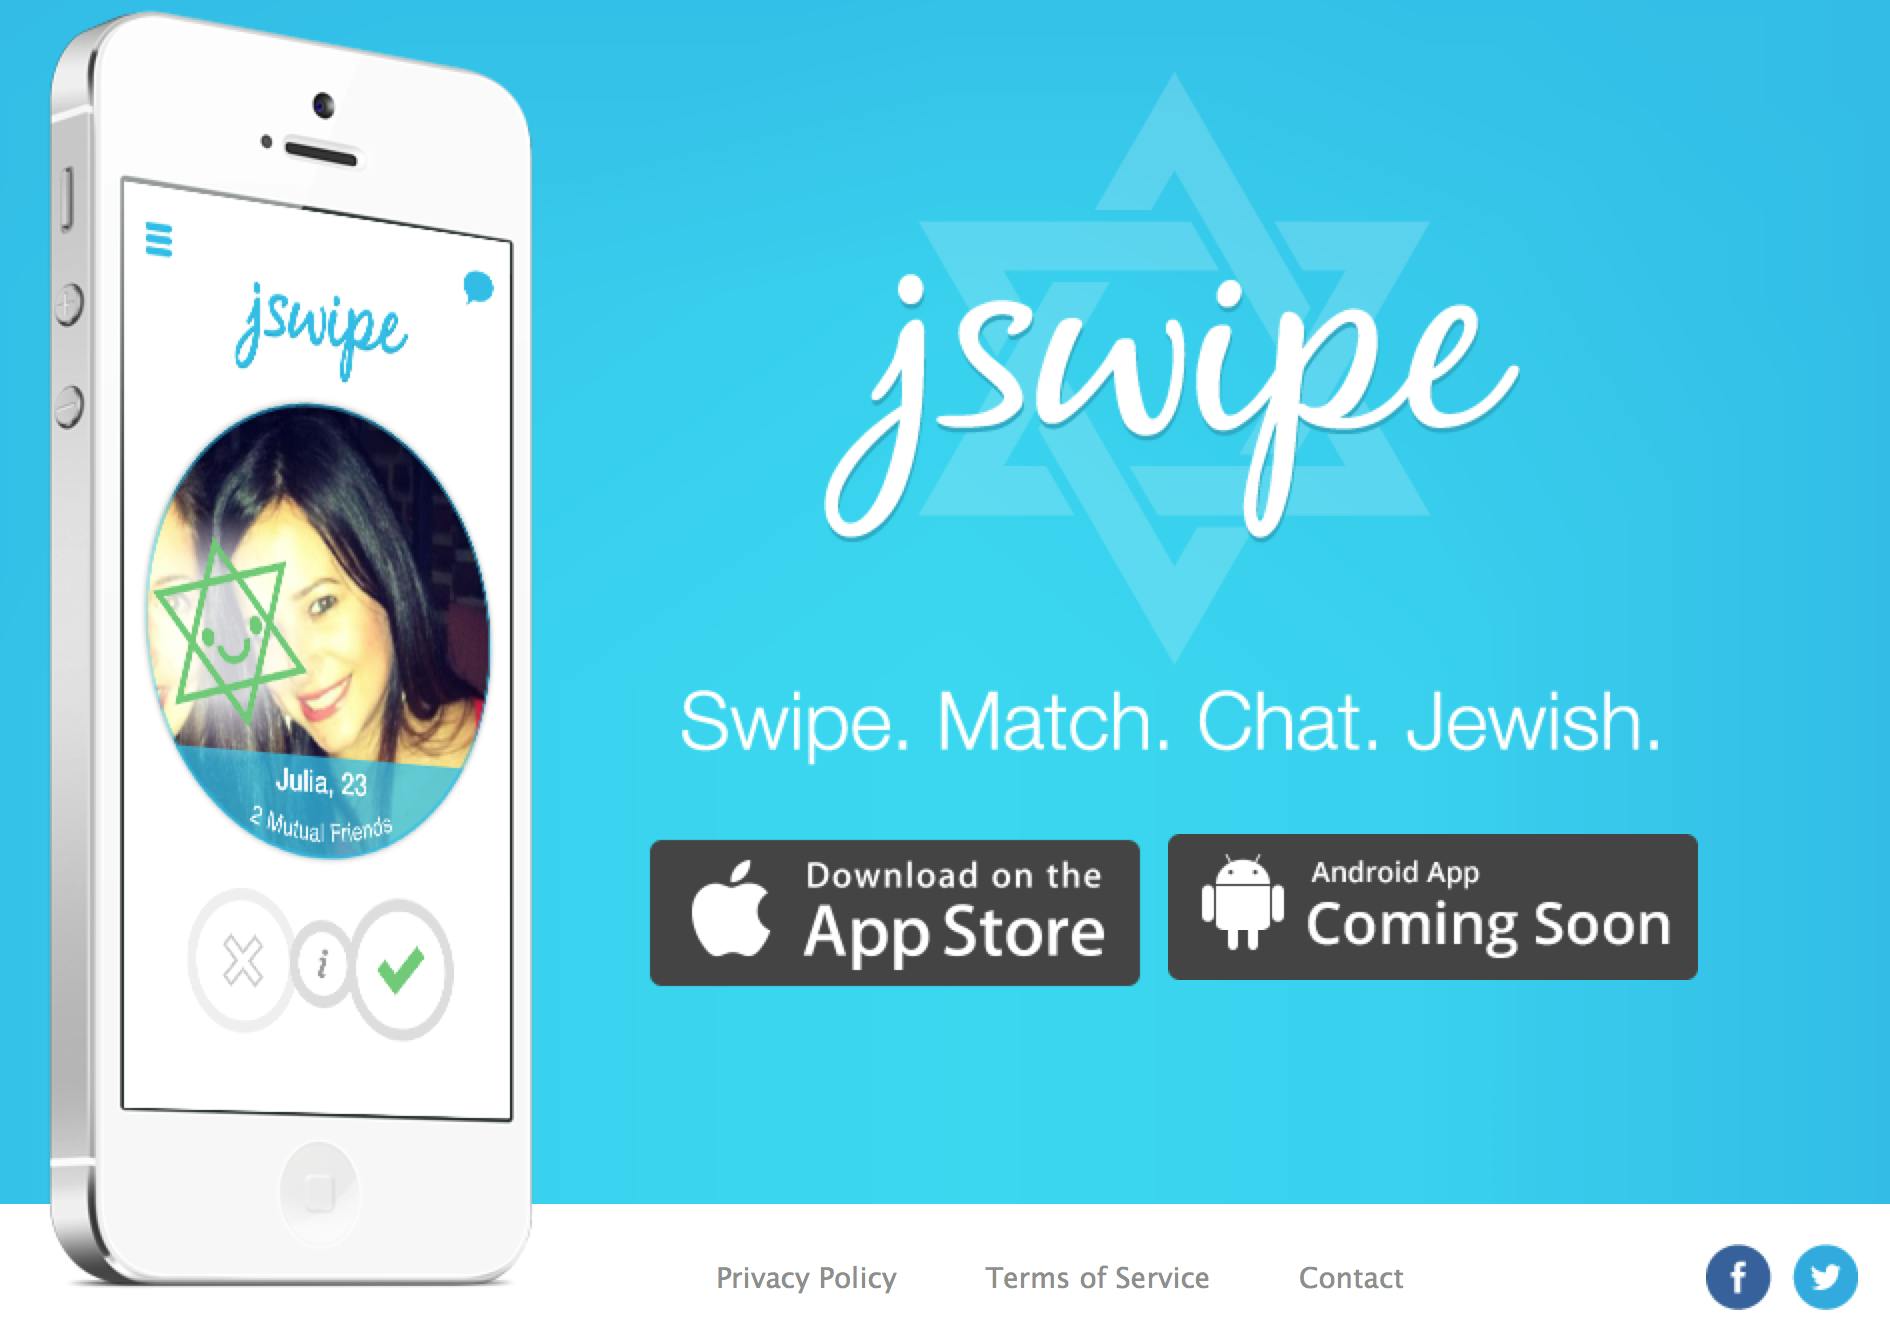 The 17 Best Dating Sites and Apps